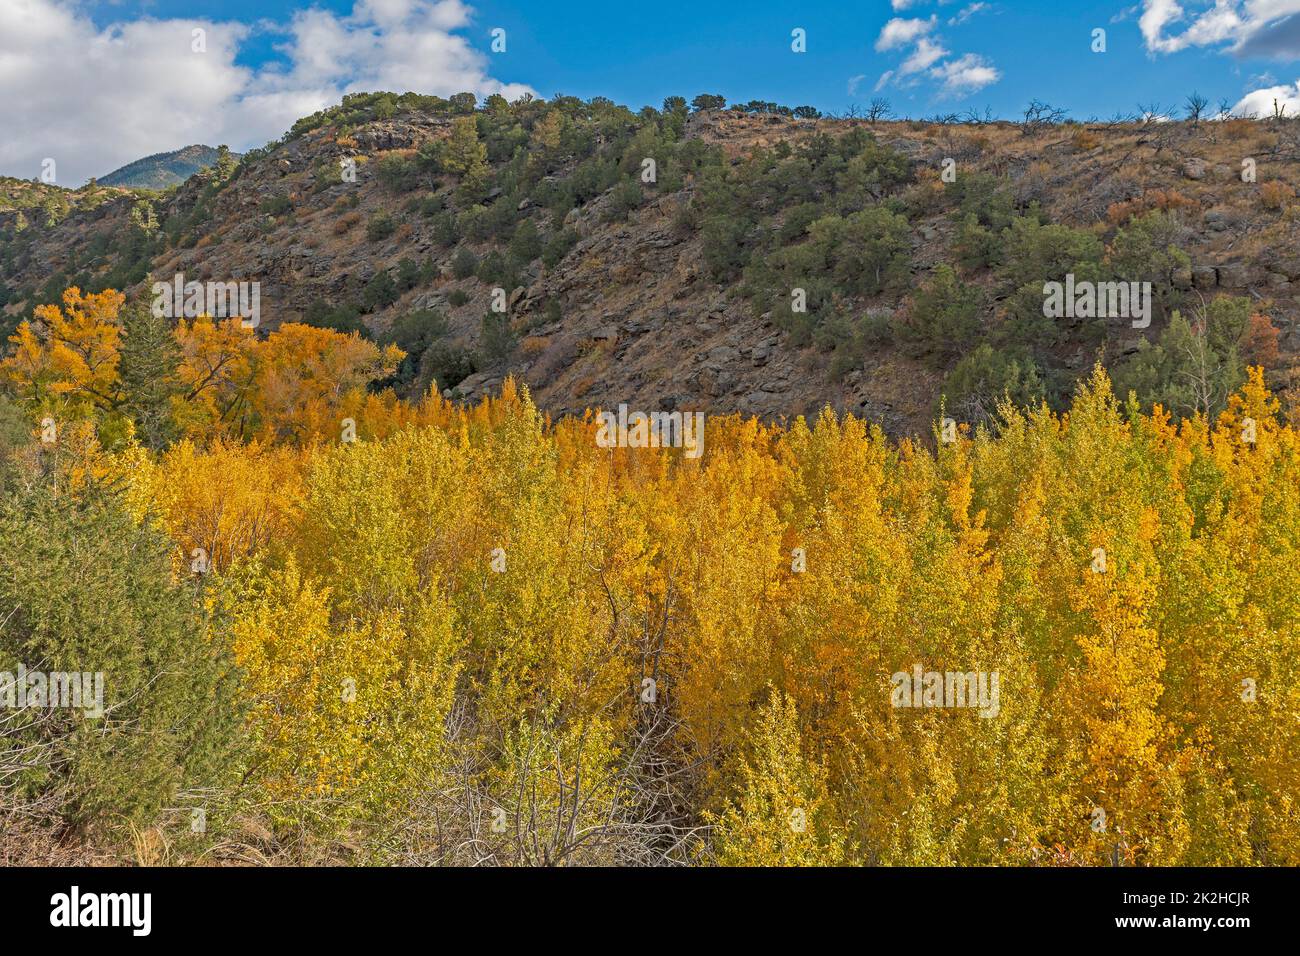 Fall Colors on the Aspen in a Mountain Canyon Stock Photo